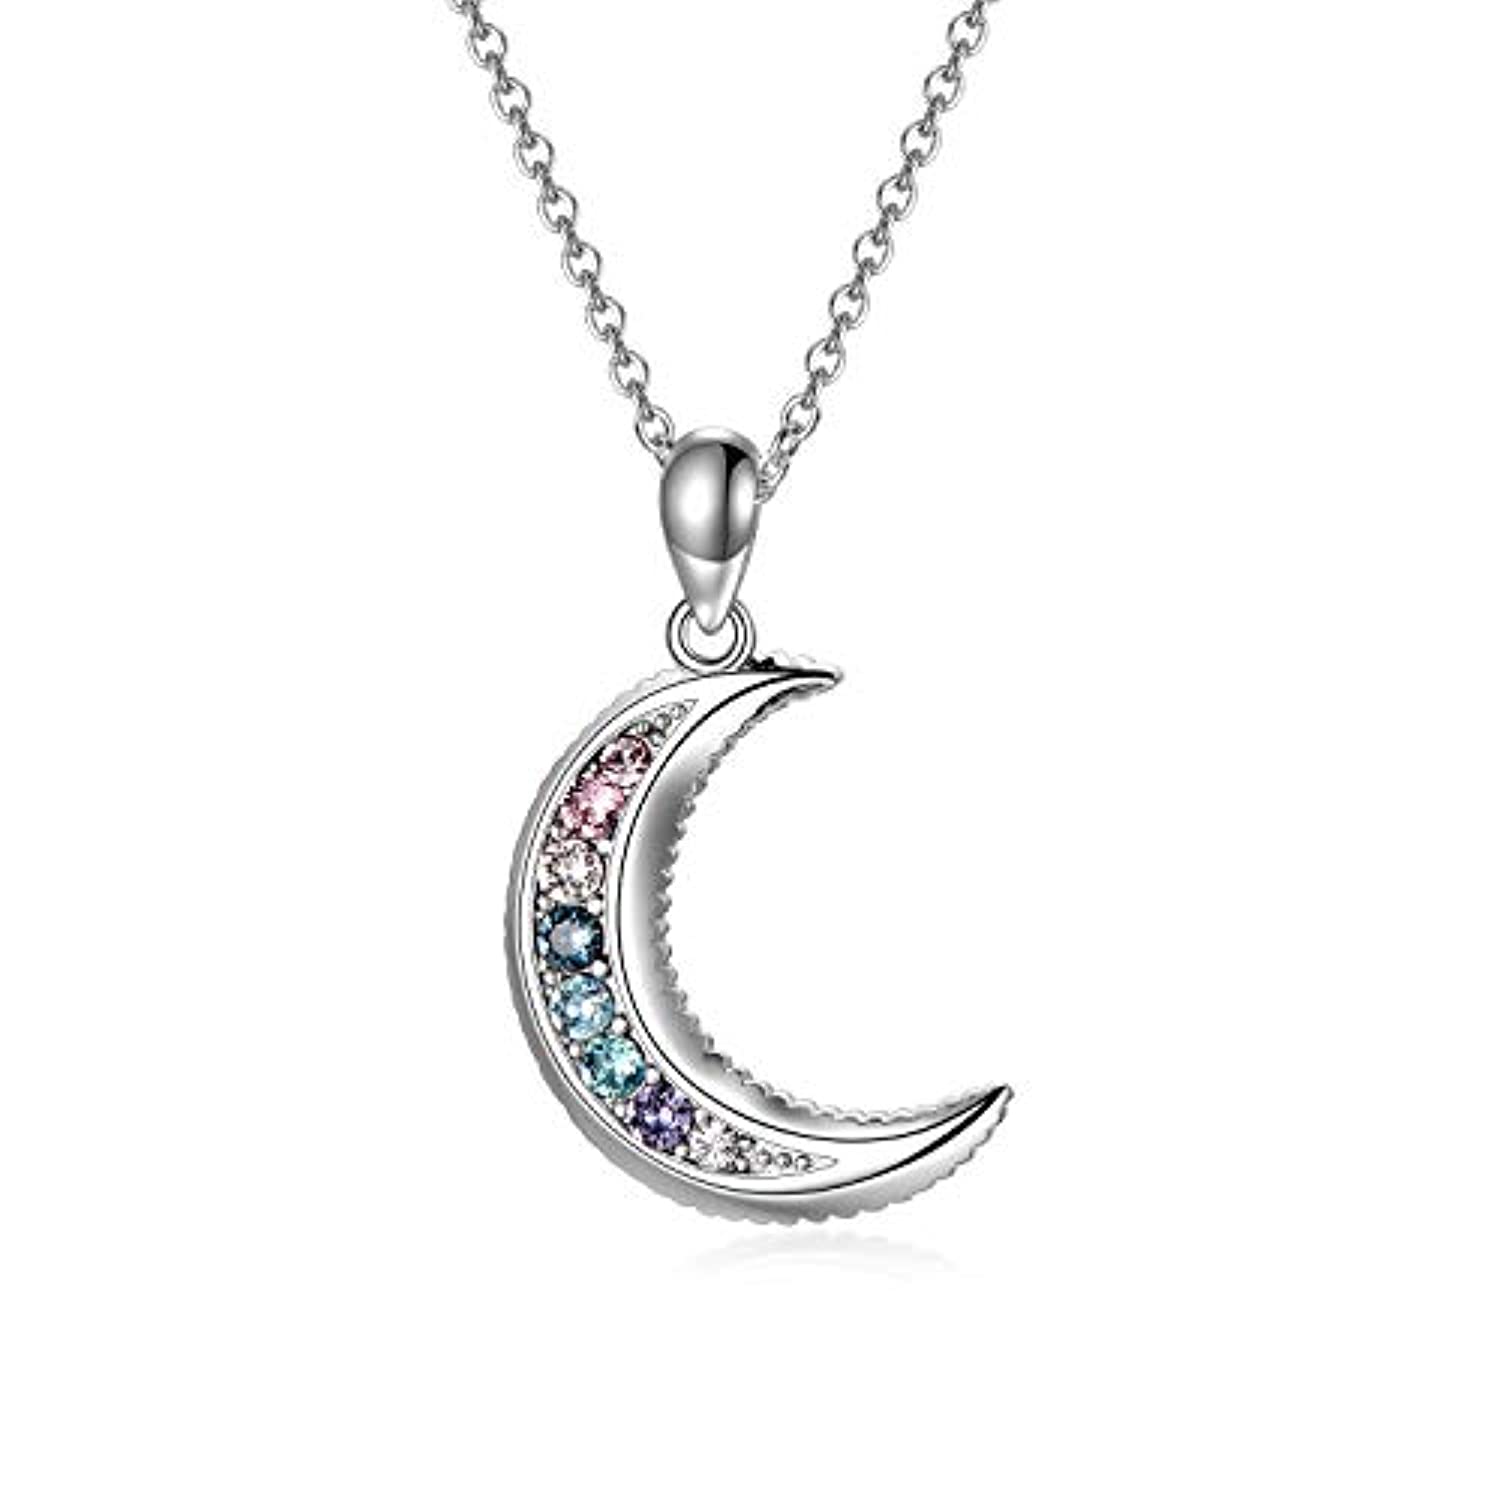 Custom Moon Phase Jewelry - Unique to Your Special Moment